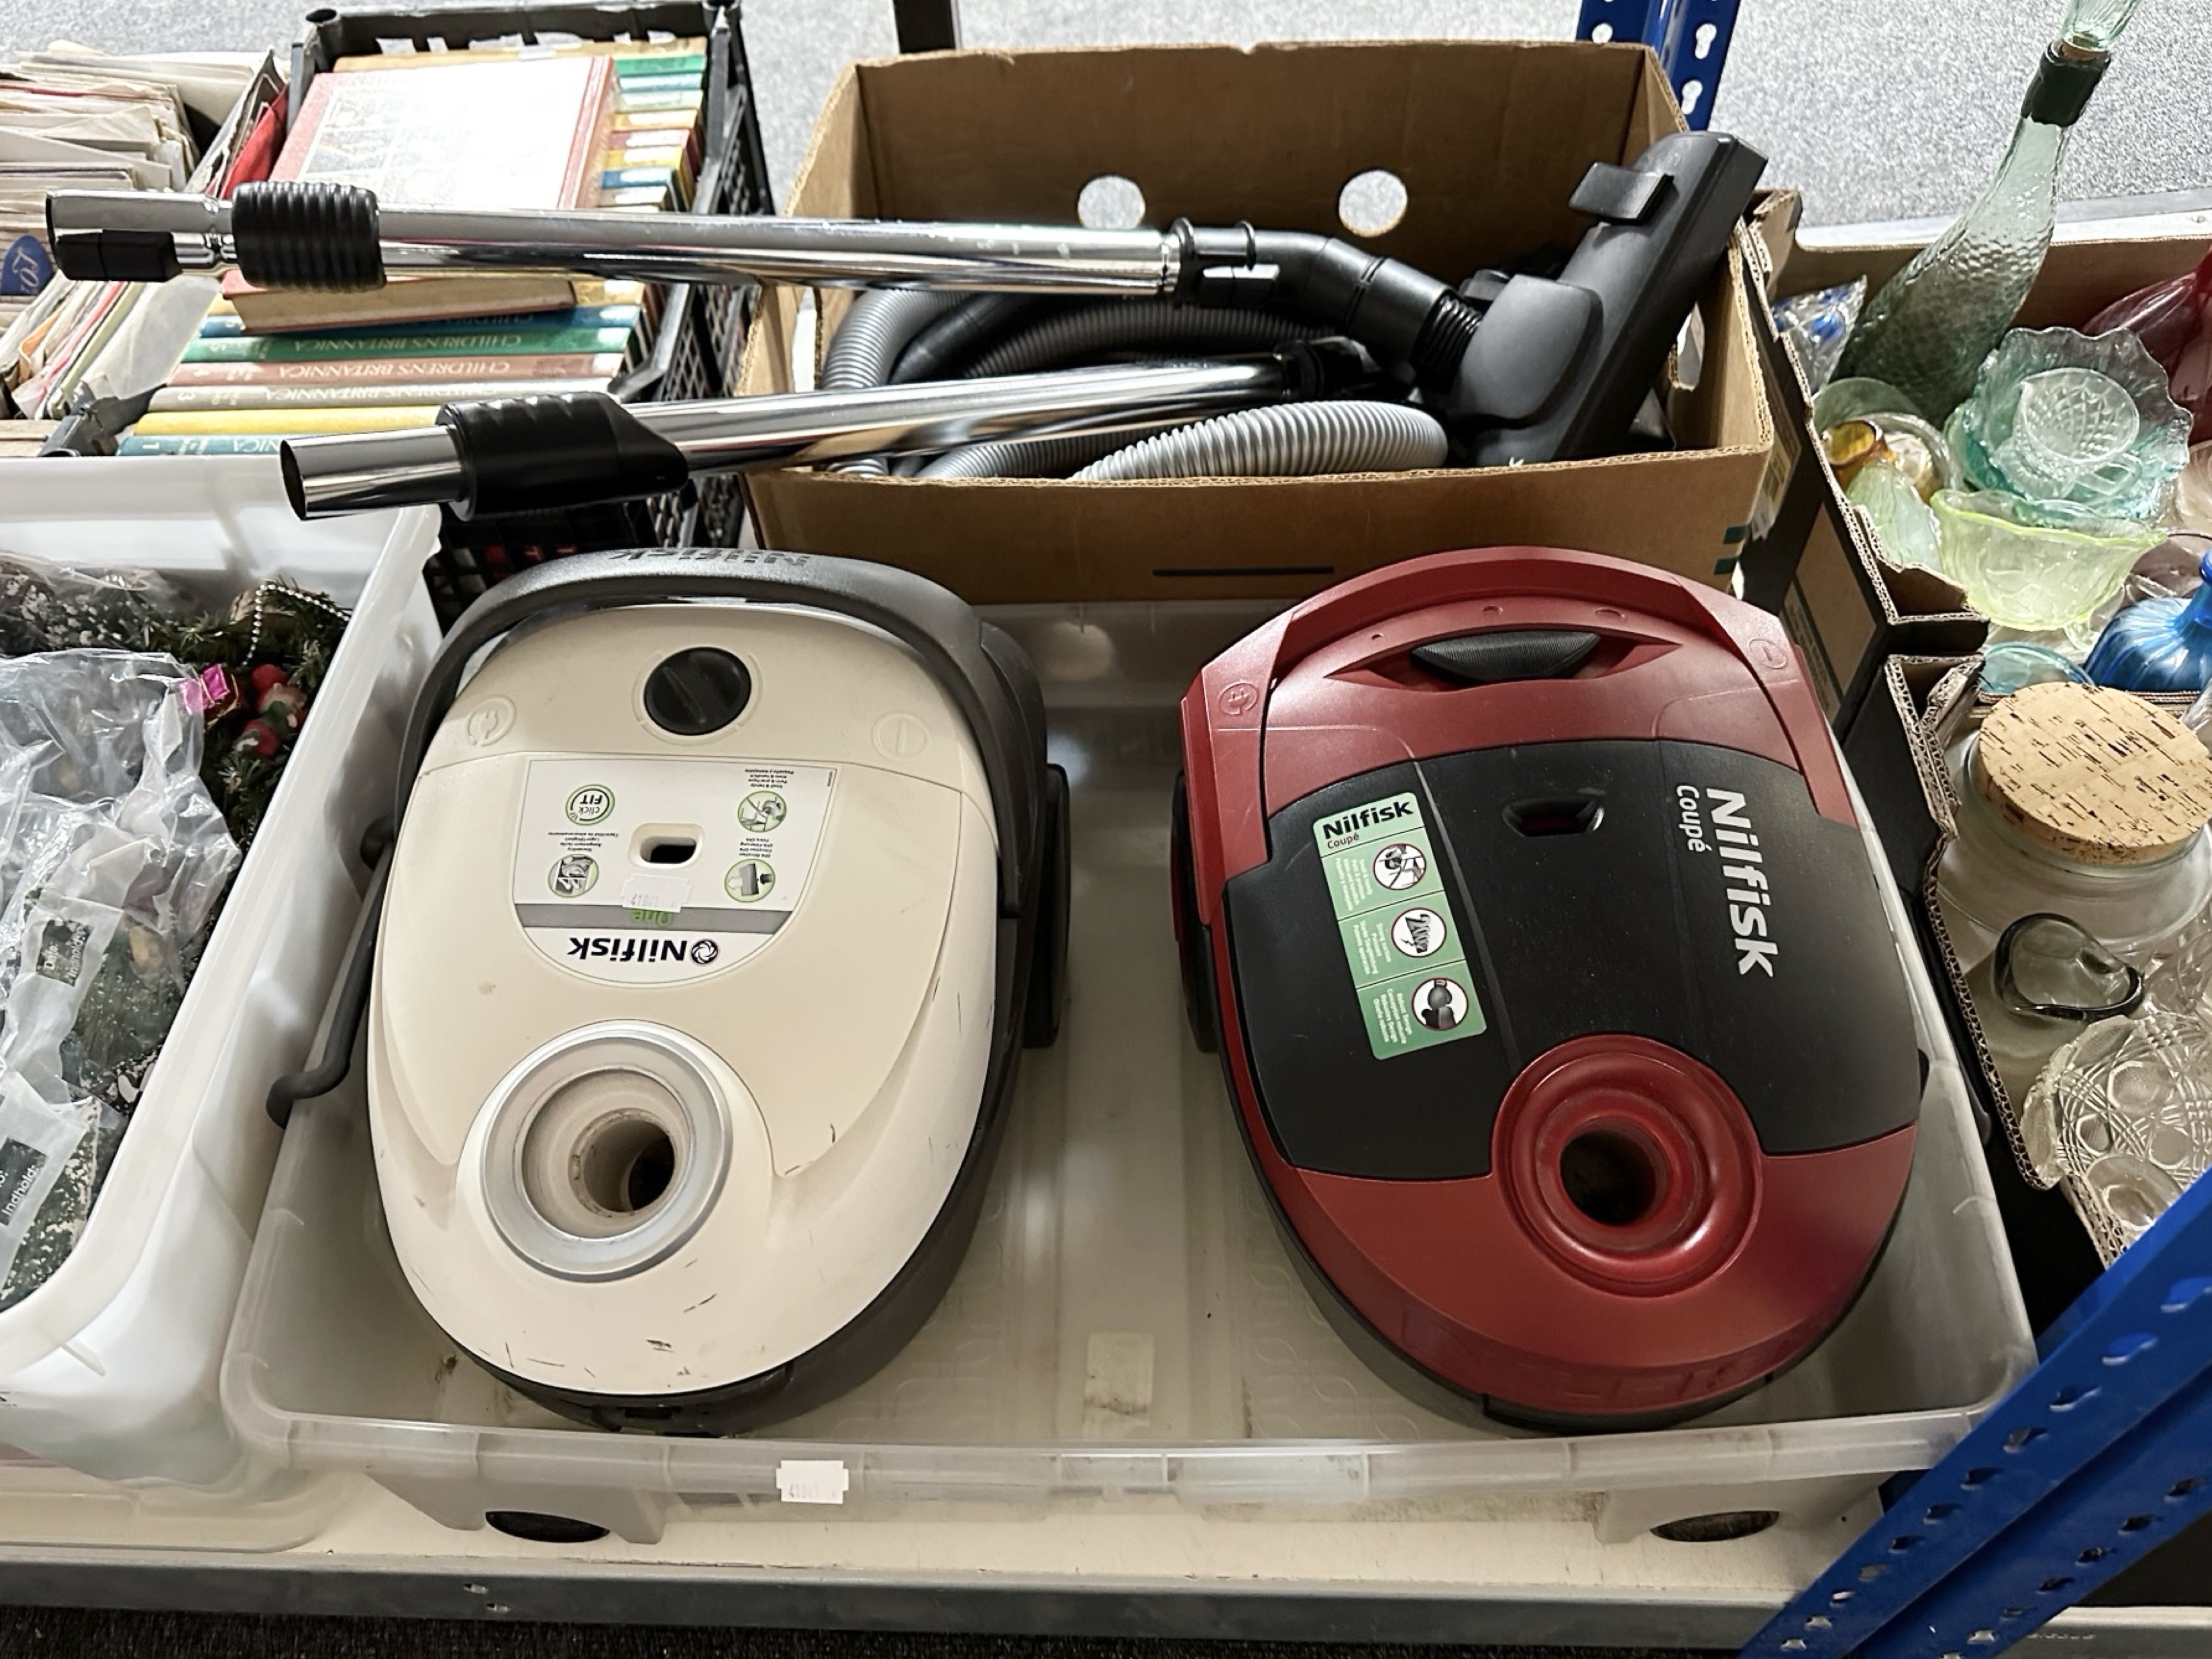 Two Nilfisk vacuum cleaners (continental plugs).